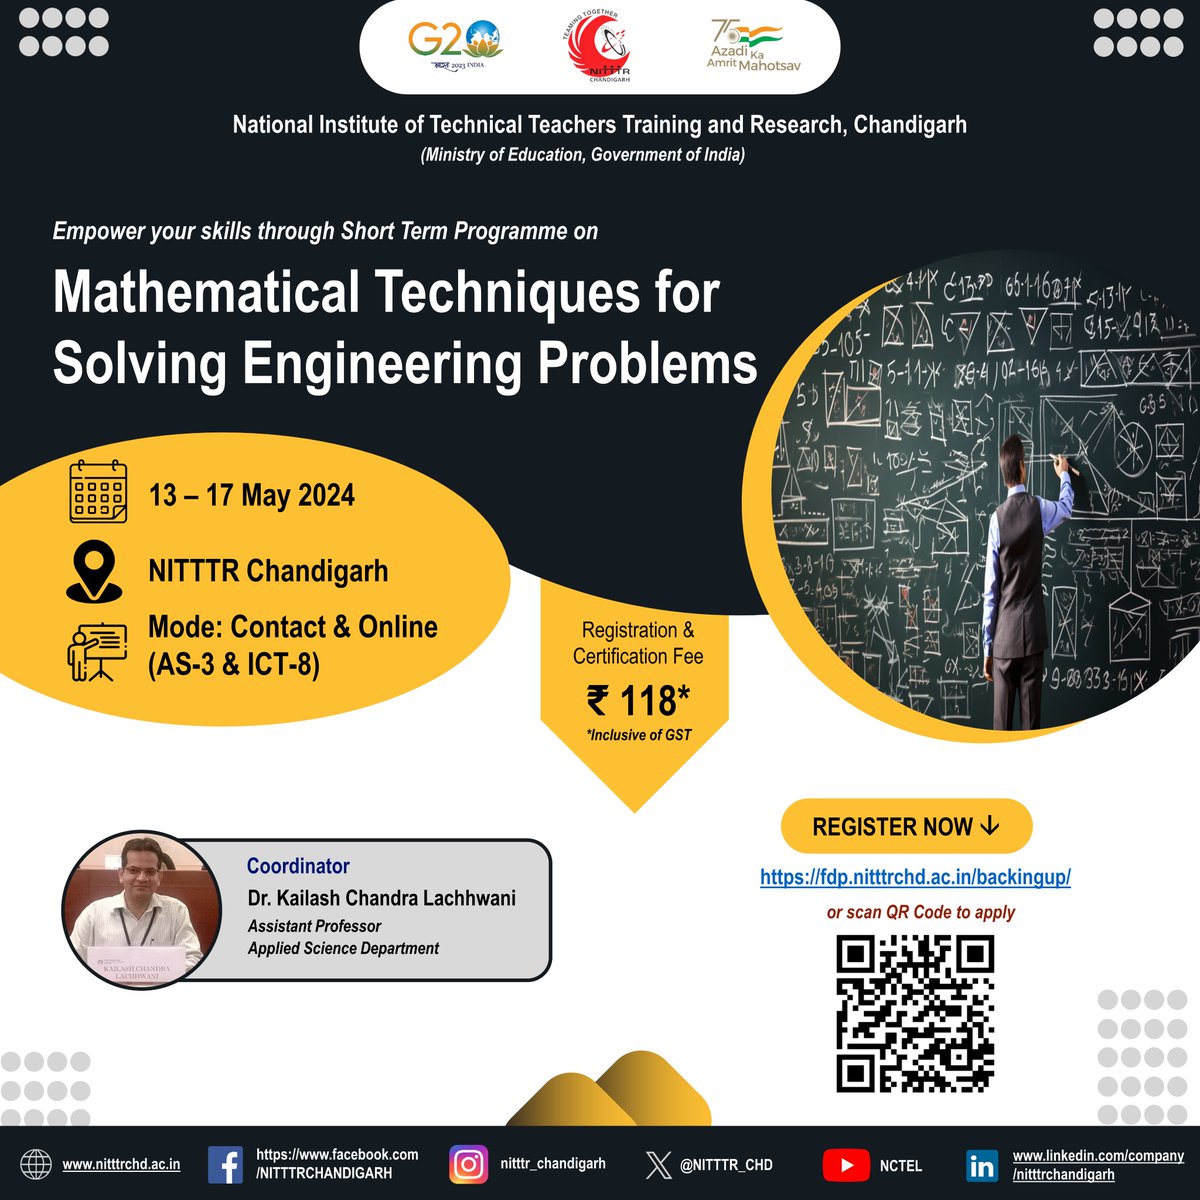 Join us for a 1 Week course on Mathematical Techniques for Solving Engineering Problems to be organized by the Applied Science Dept. from 13-17 May'24. Interested faculty & staff members may apply at fdp.nitttrchd.ac.in/backingup/ #nitttrchd #EngineeringProblems #MathematicalTechniques